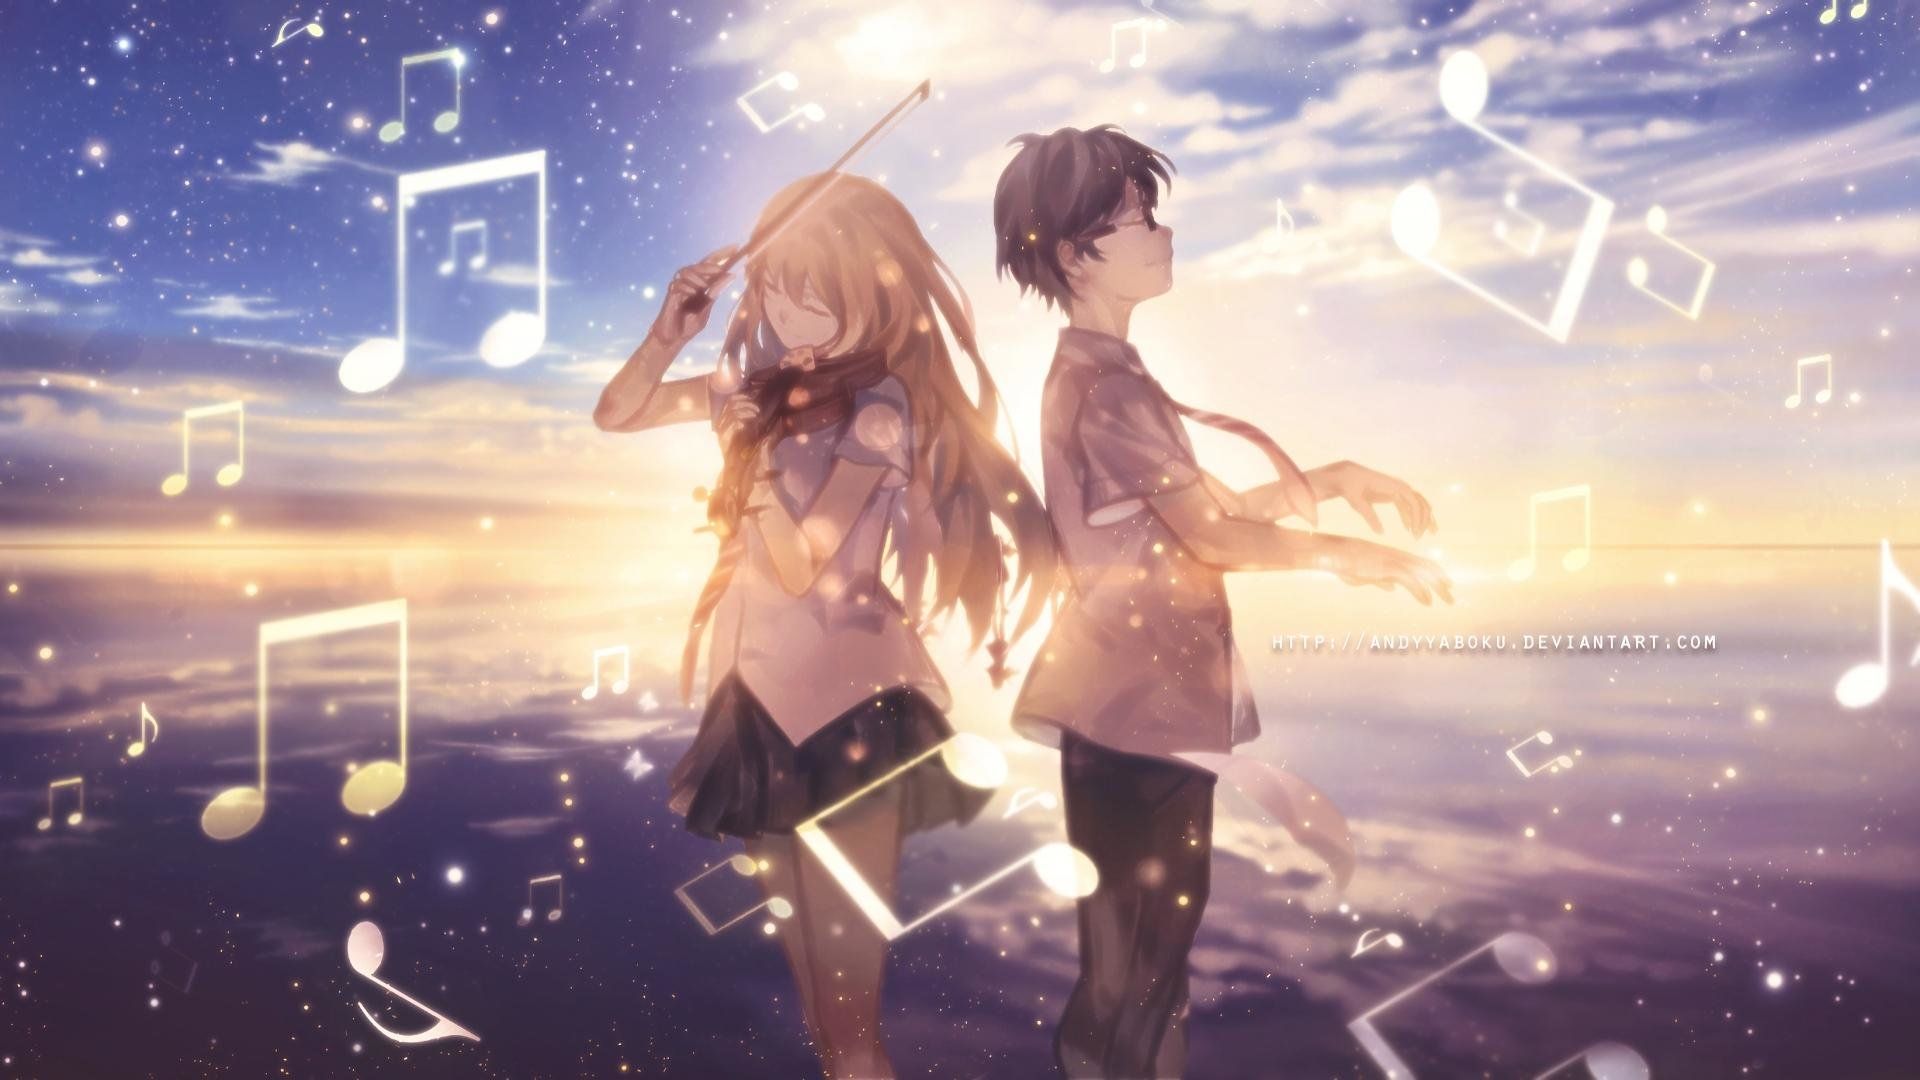 Your Lie in April Computer Wallpapers.